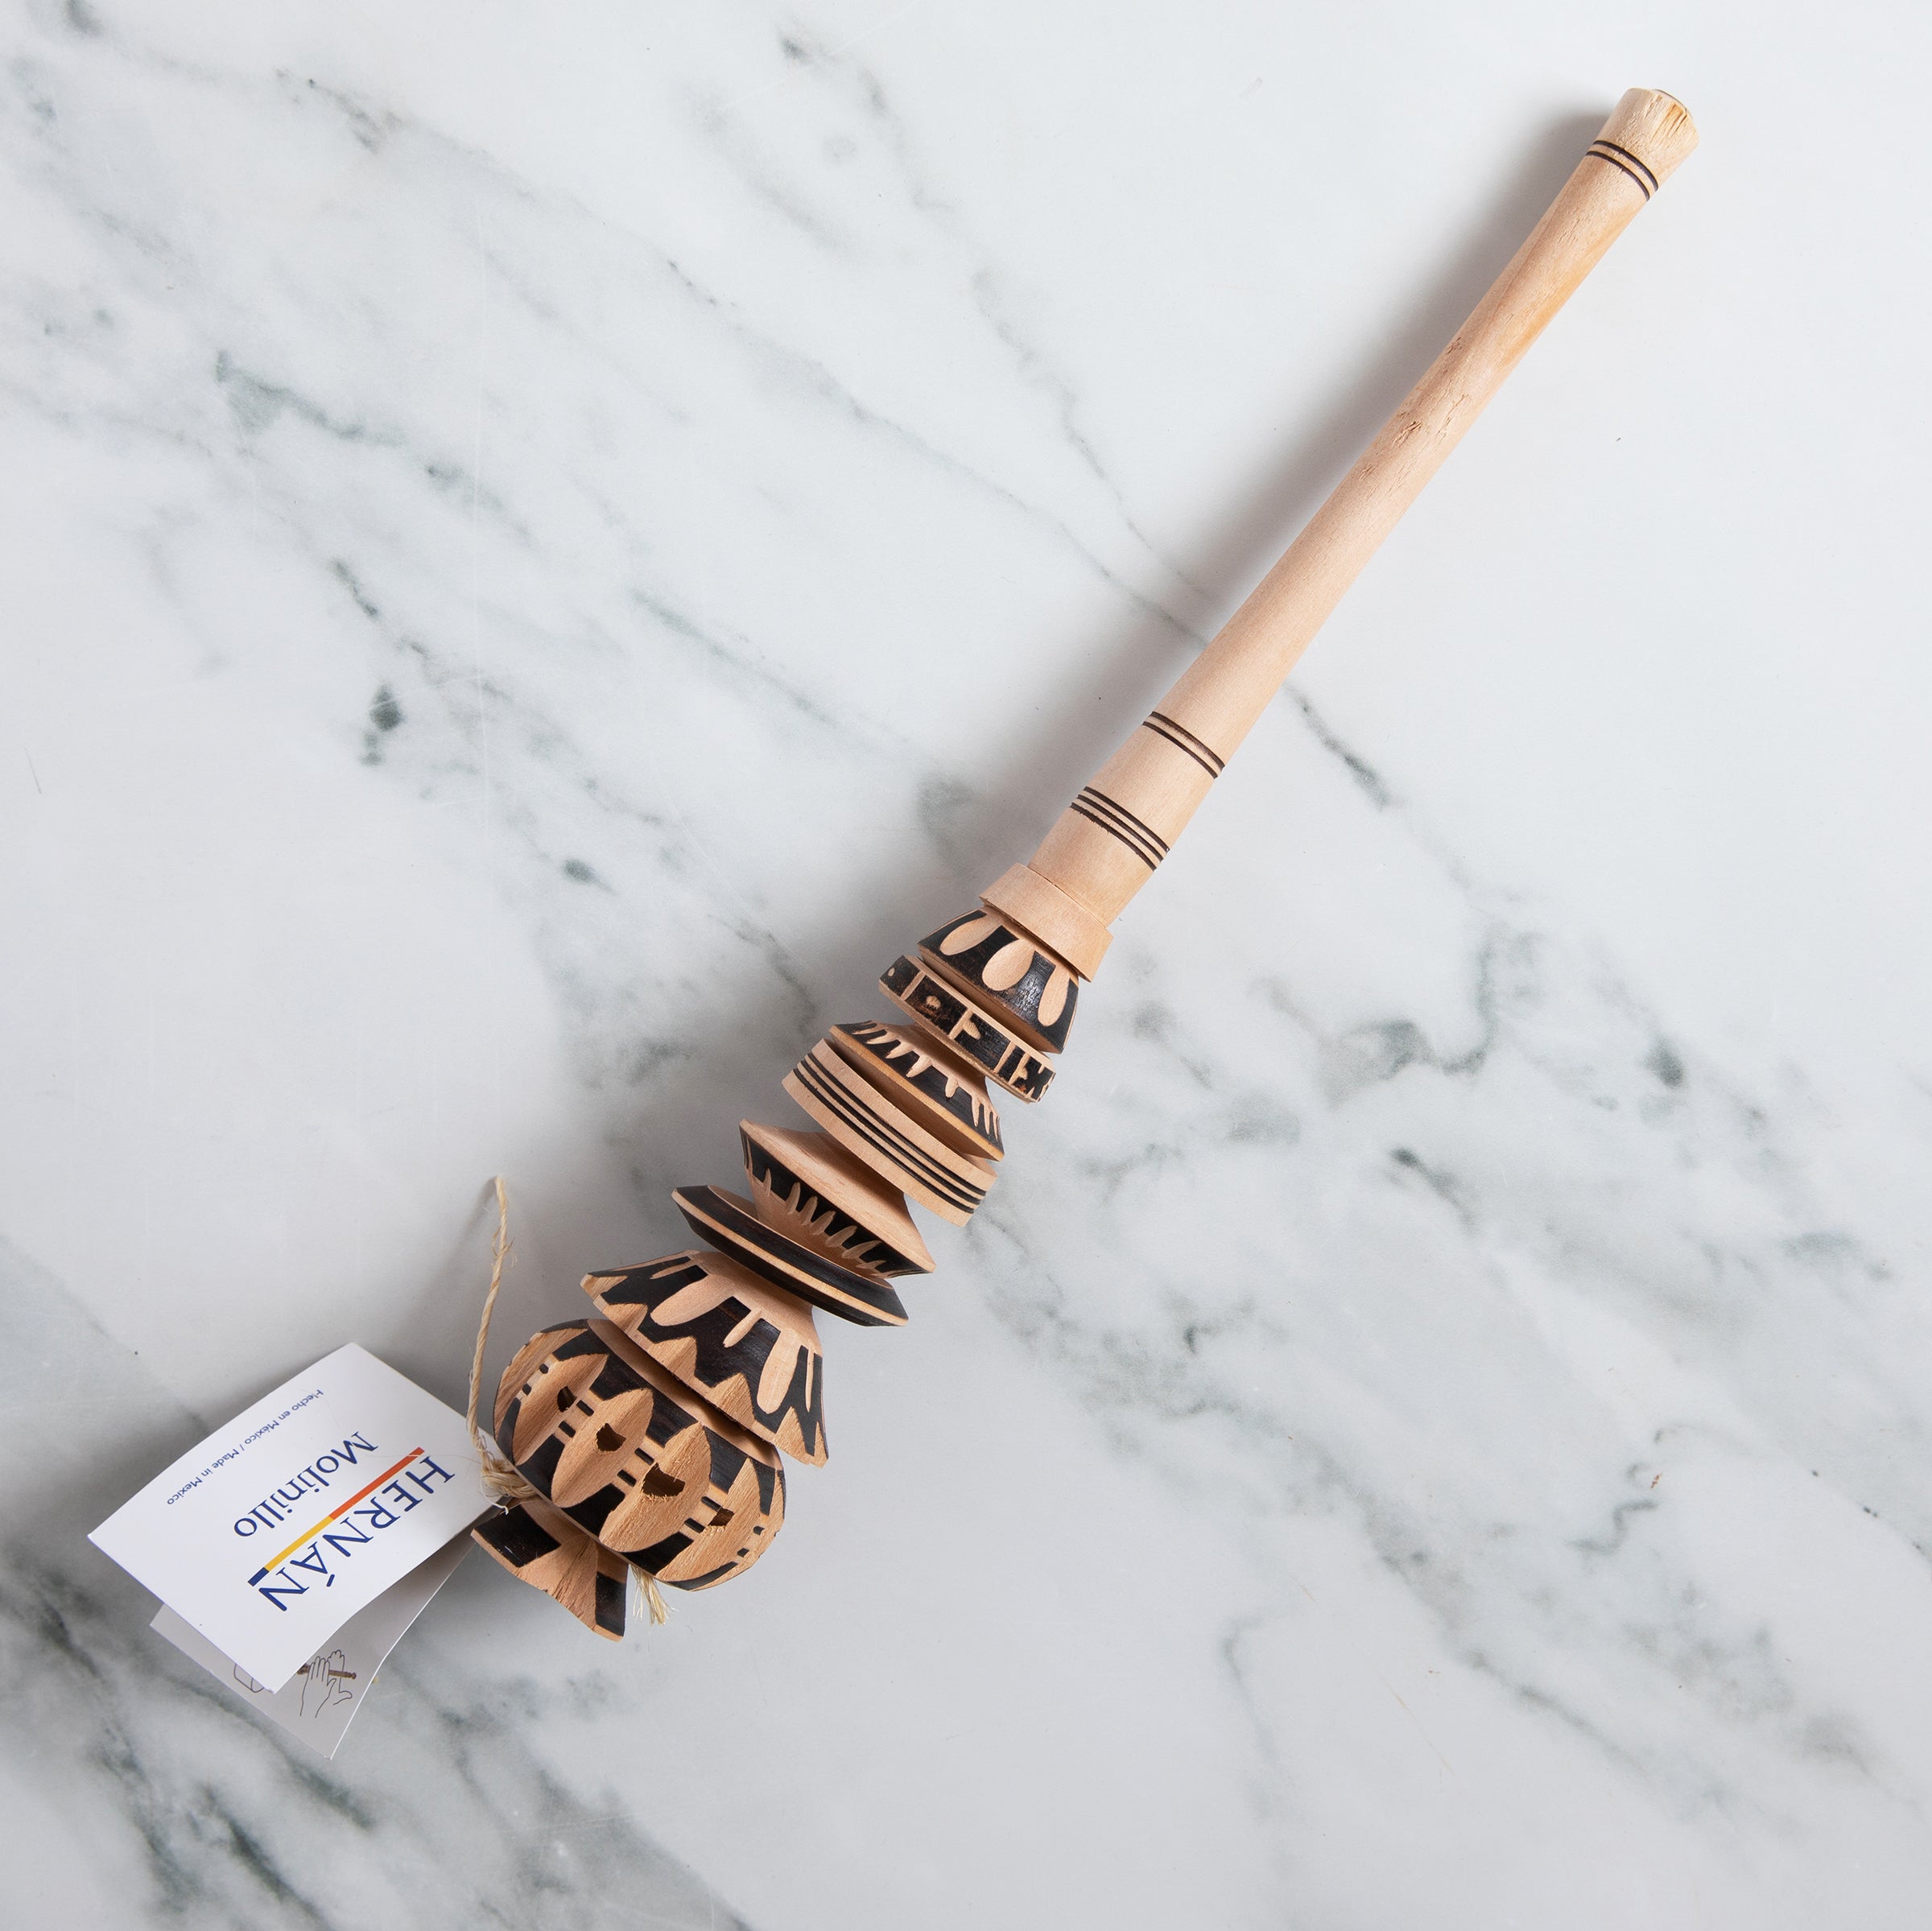 Molinillo Chocolate Frother - Forté Chocolate